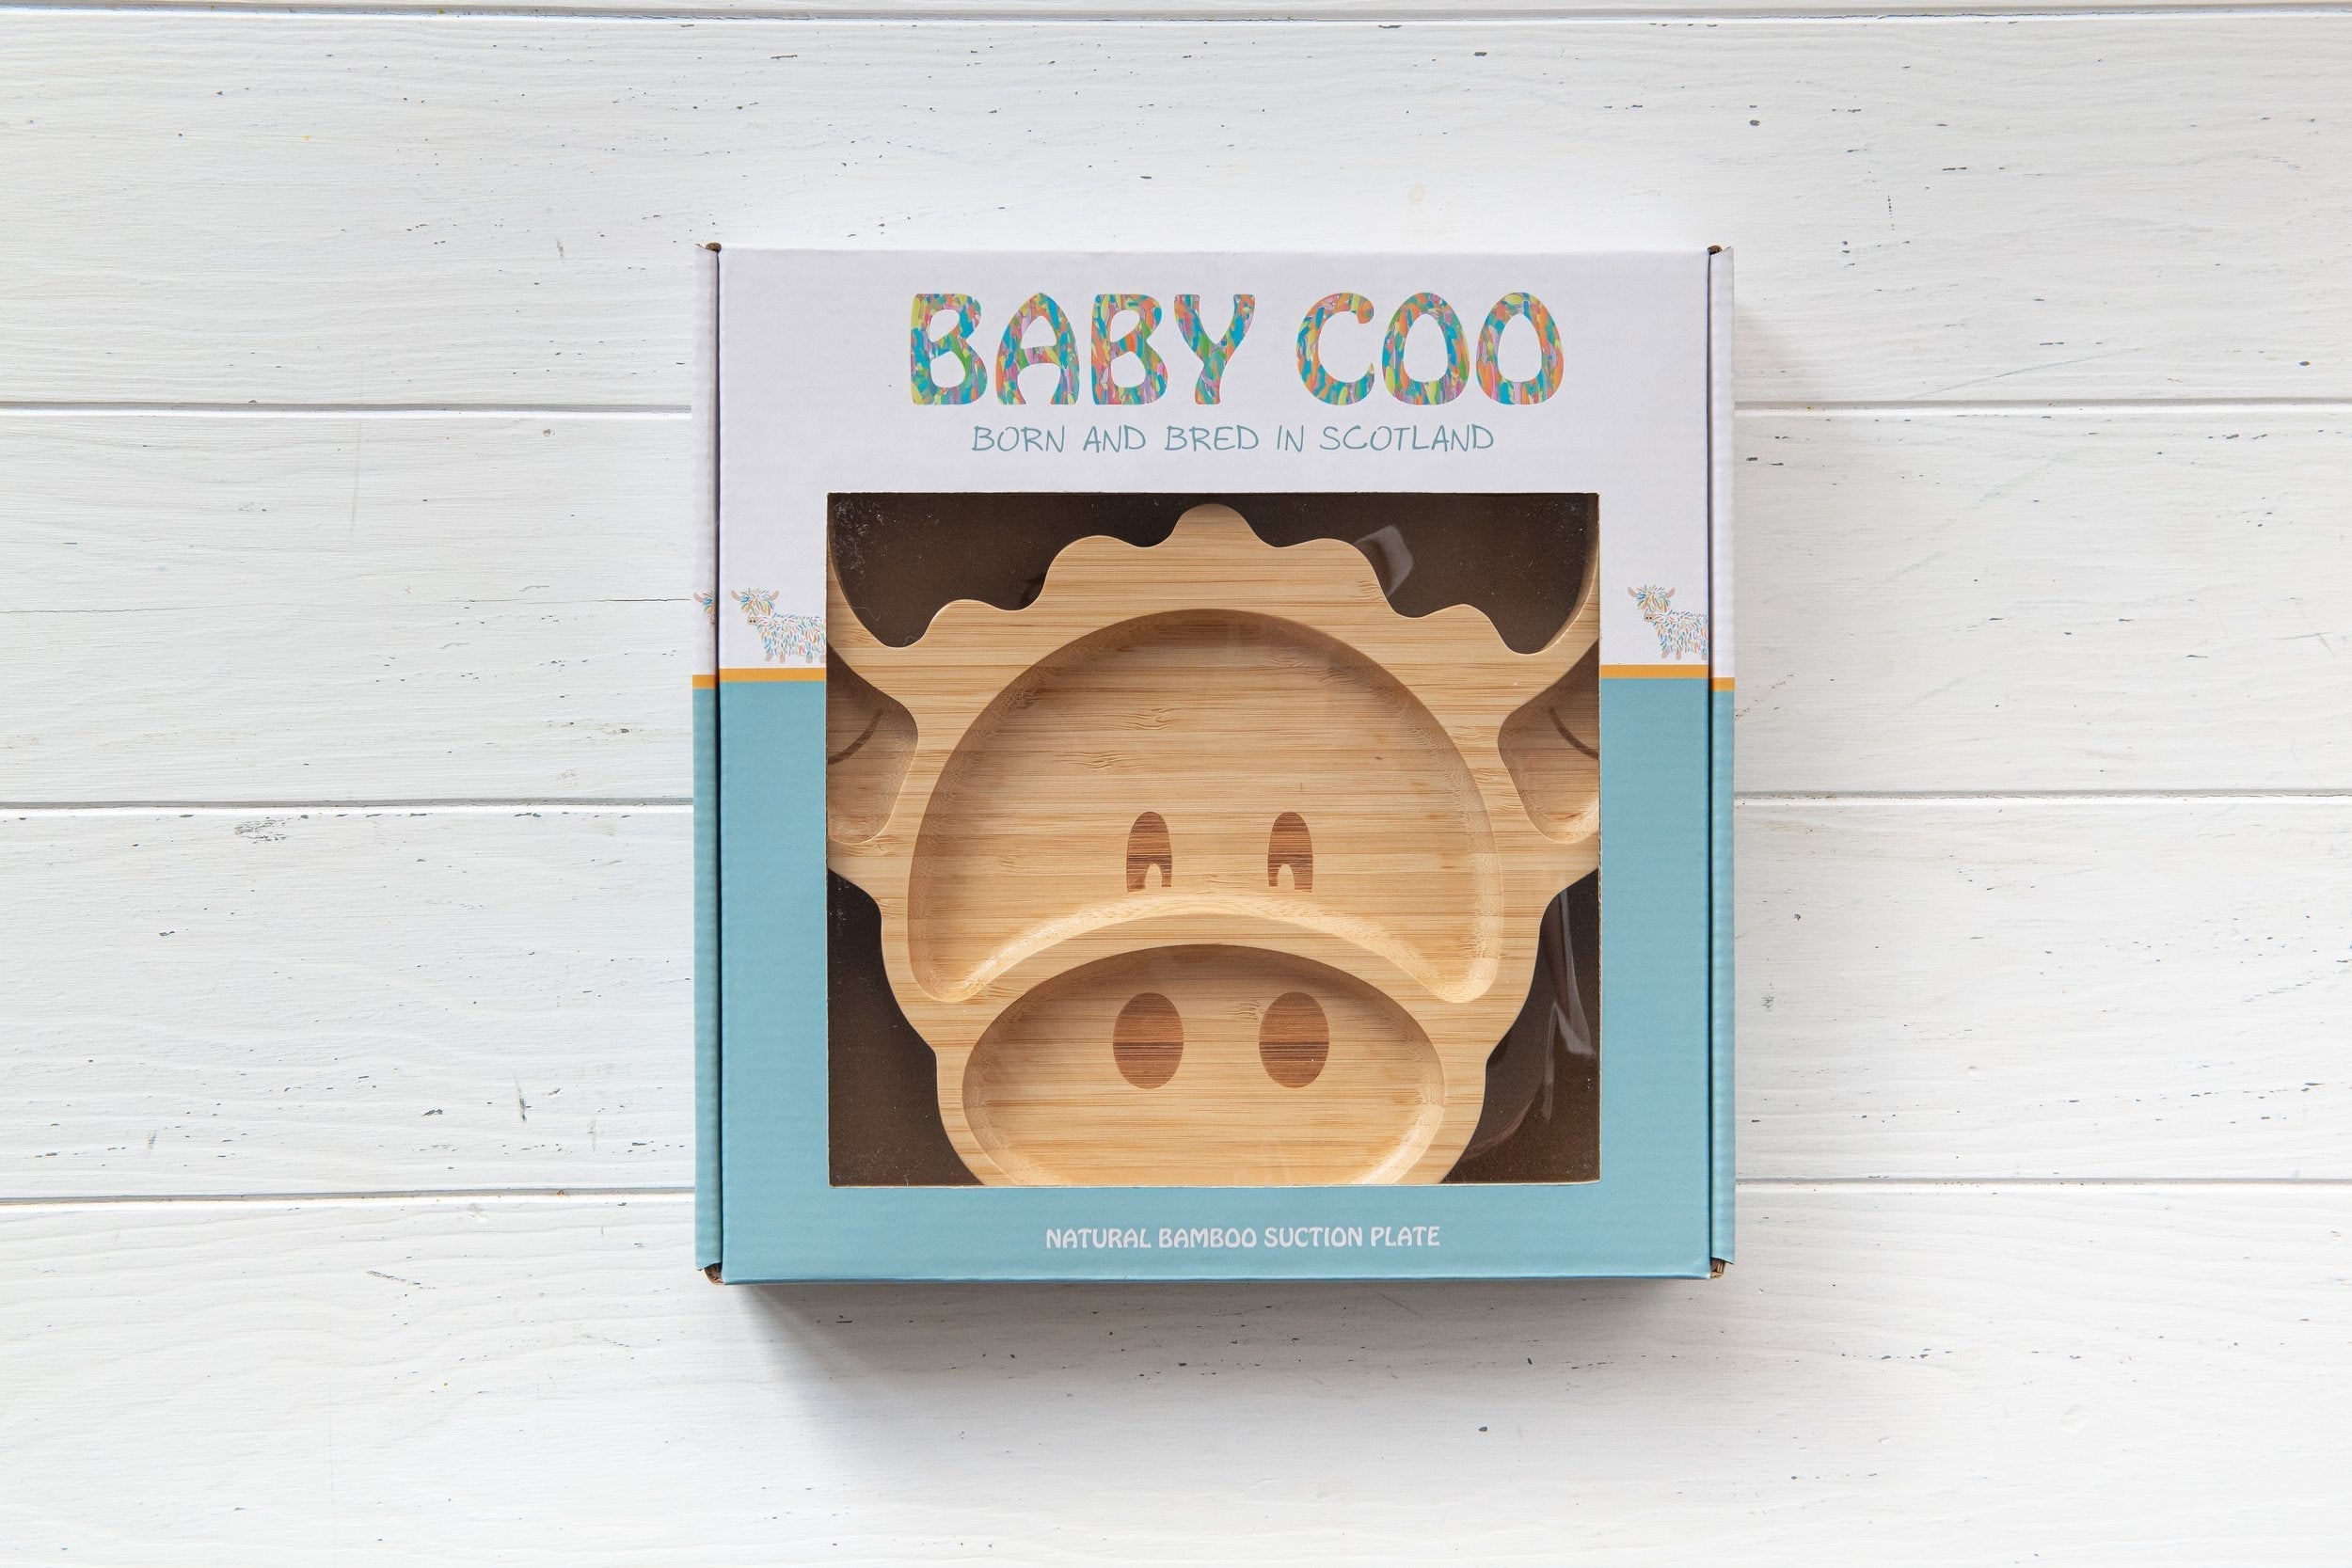 Baby Coo Bamboo Suction Plate | Hairy Coo | Scottish Creations